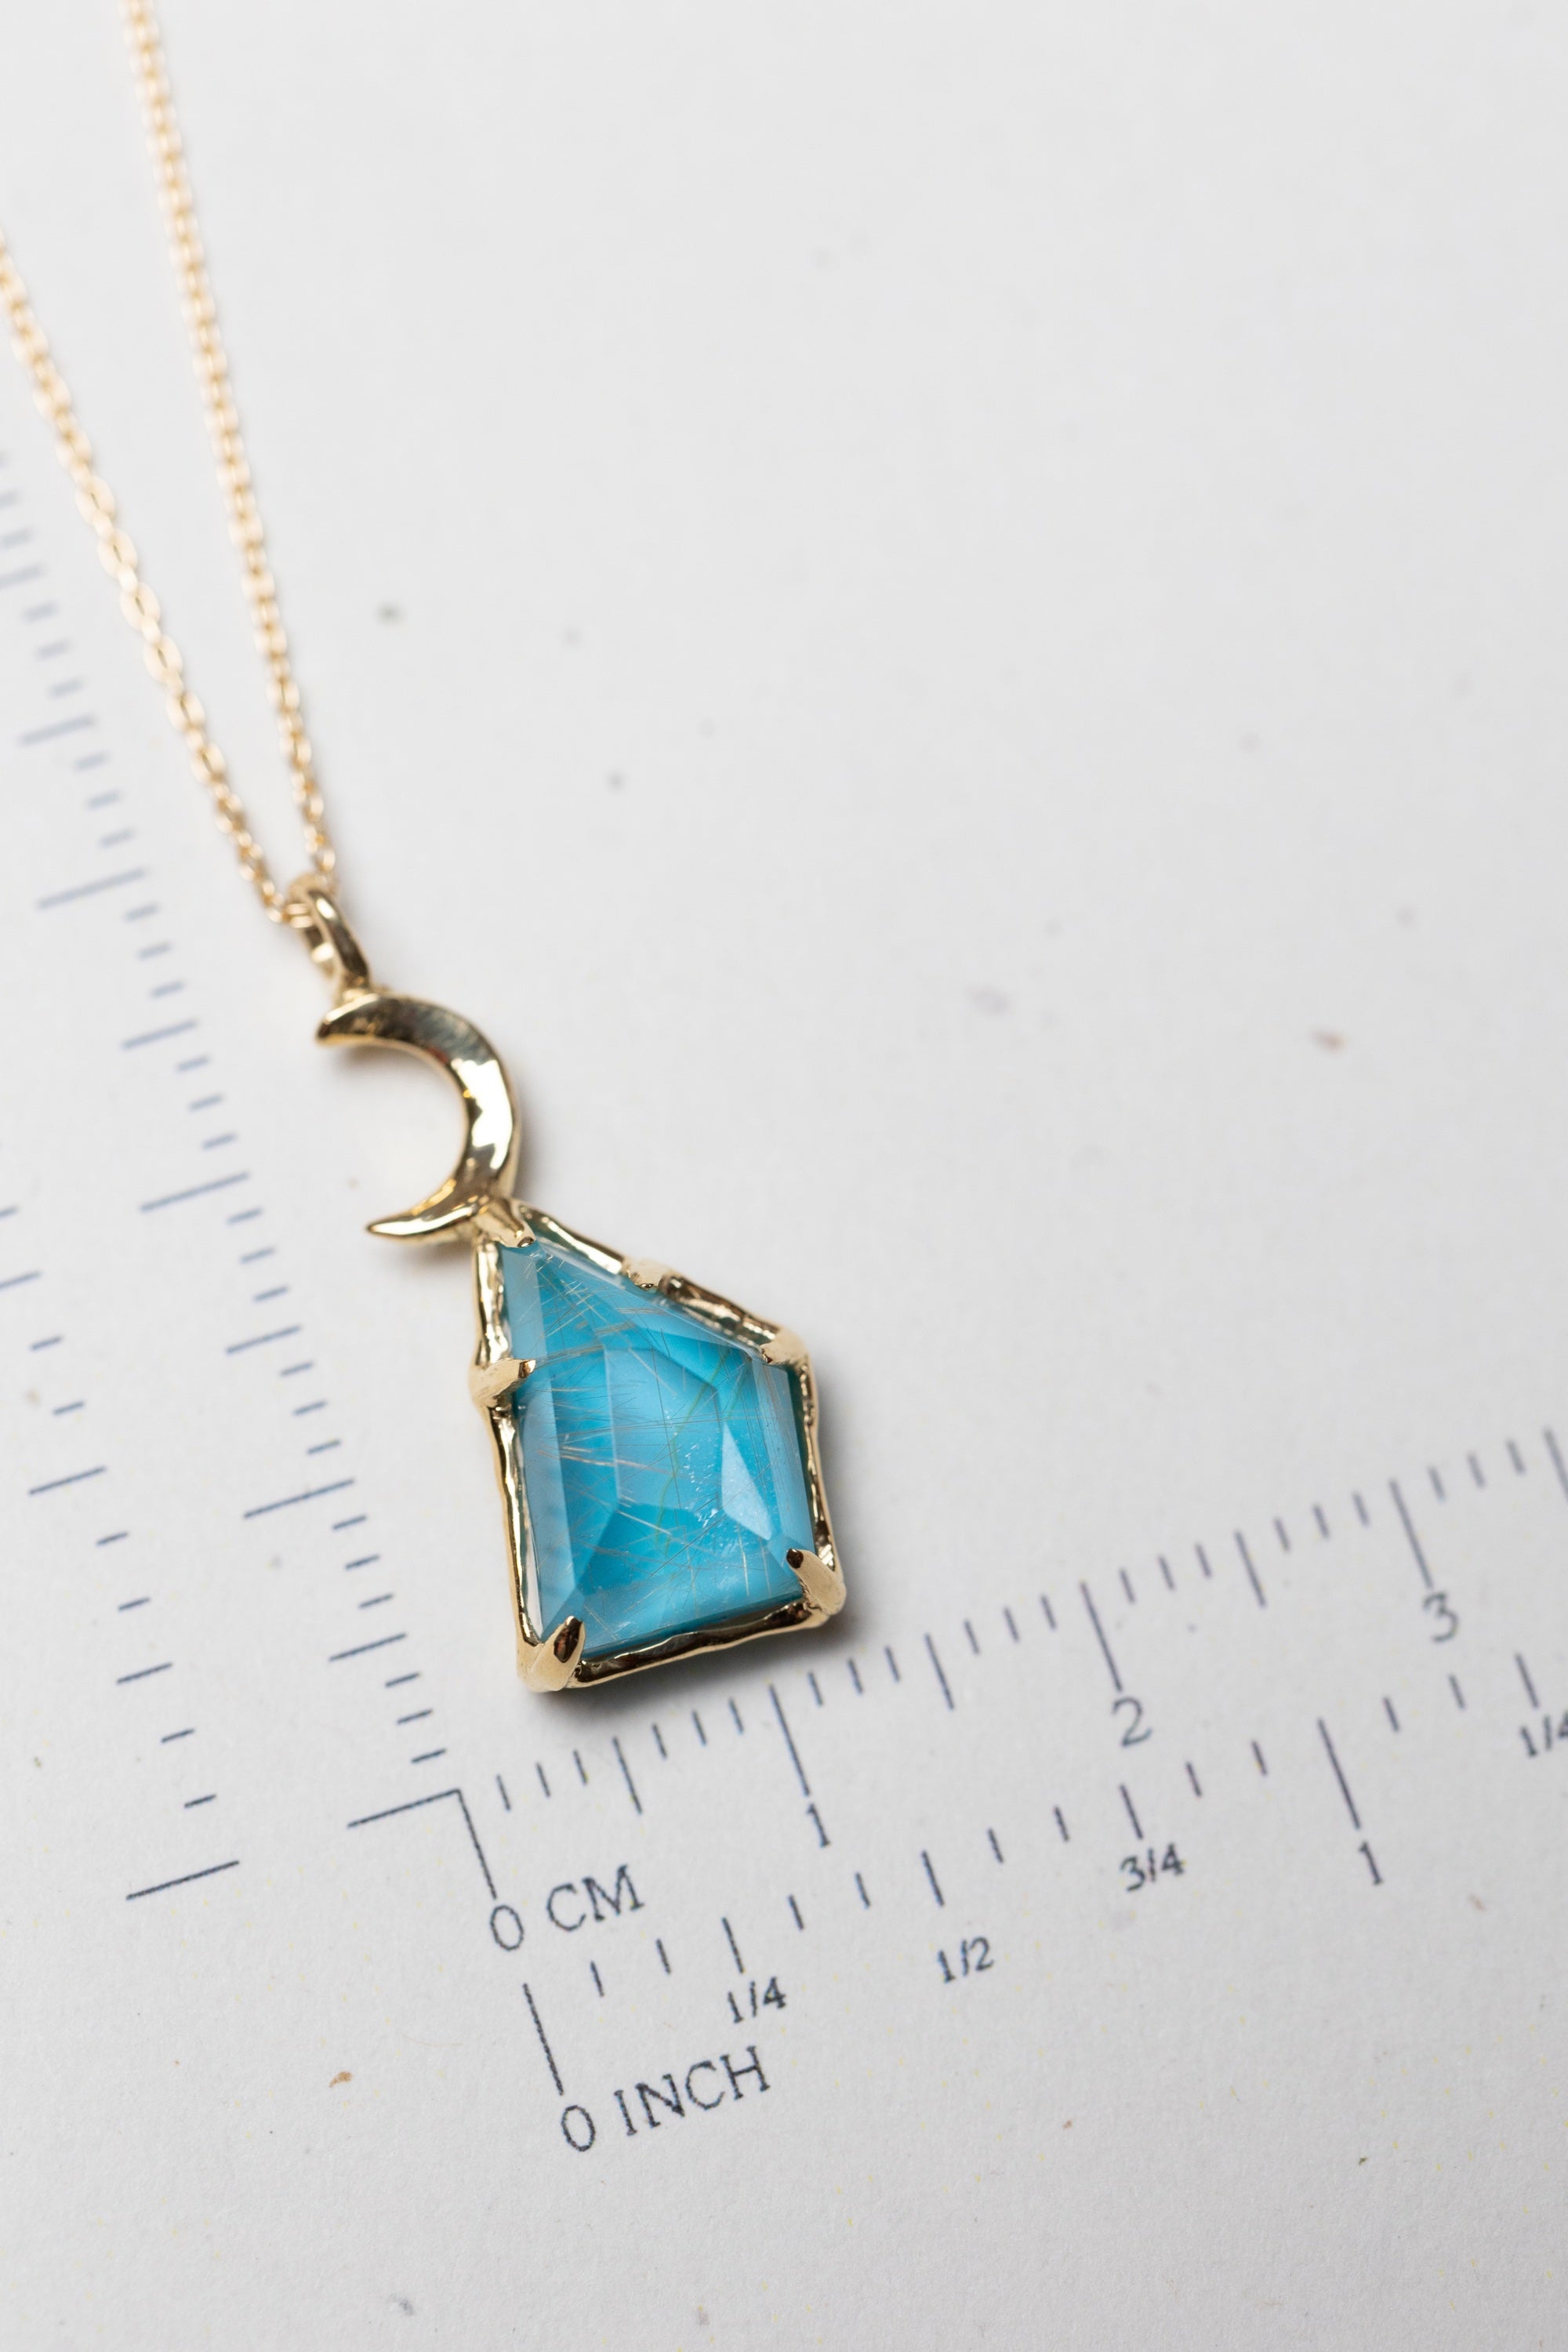 A Moon Shines Above An Ocean Blue Doublet Necklace (Turquoise and Rutilated Quartz on 18k)